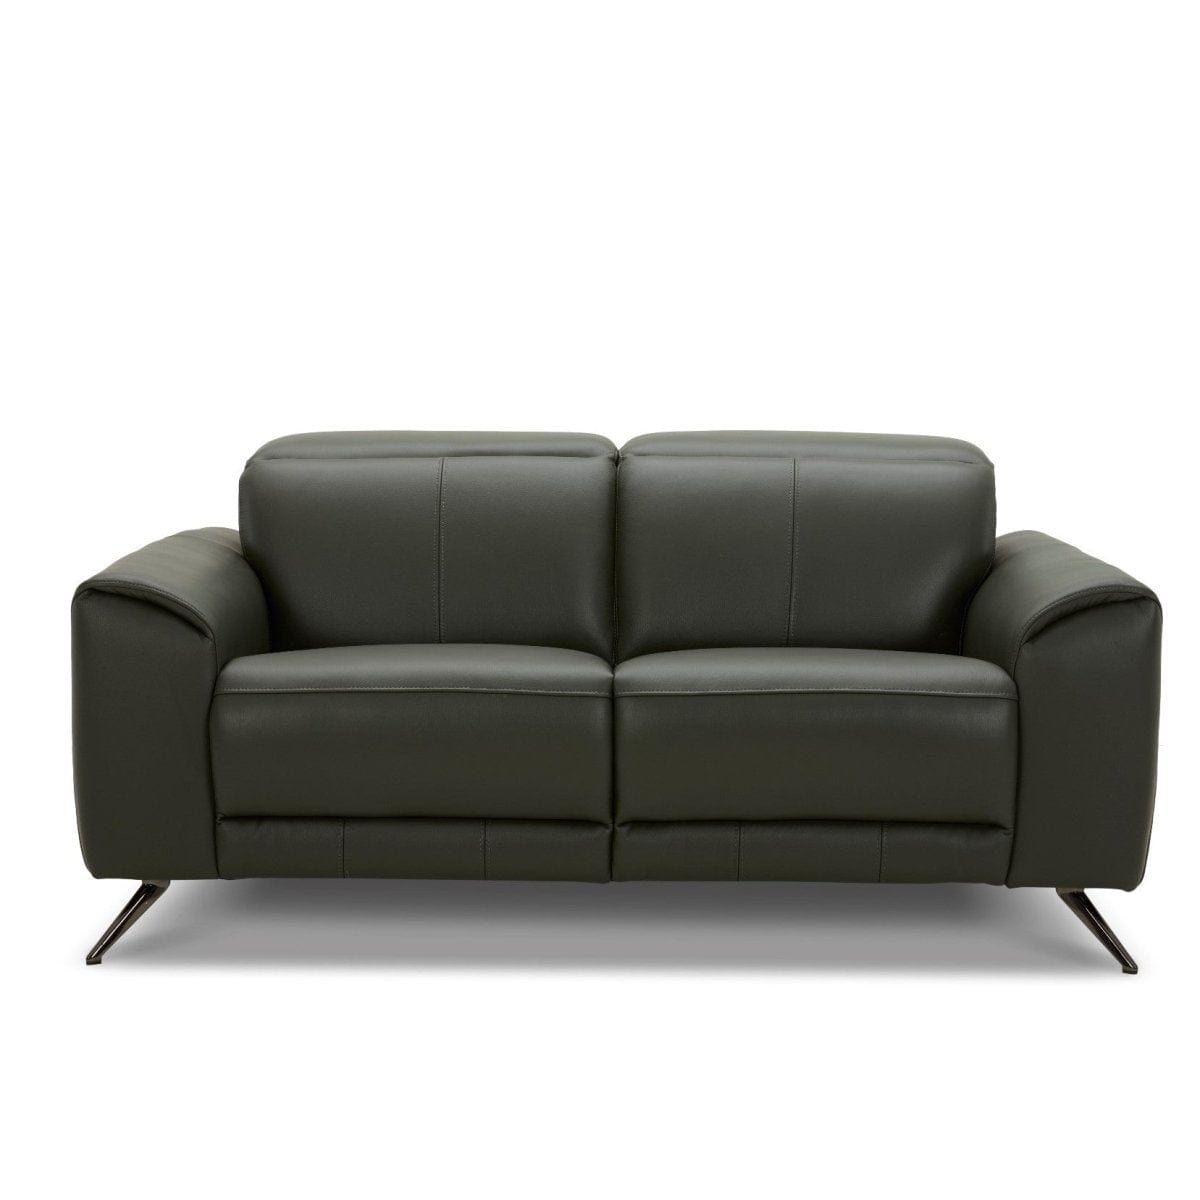 KUKA KM.5122 Leather Electrical Recliner Sofa (2/3-Seater/L-Shape) (M Series) (I) picket and rail